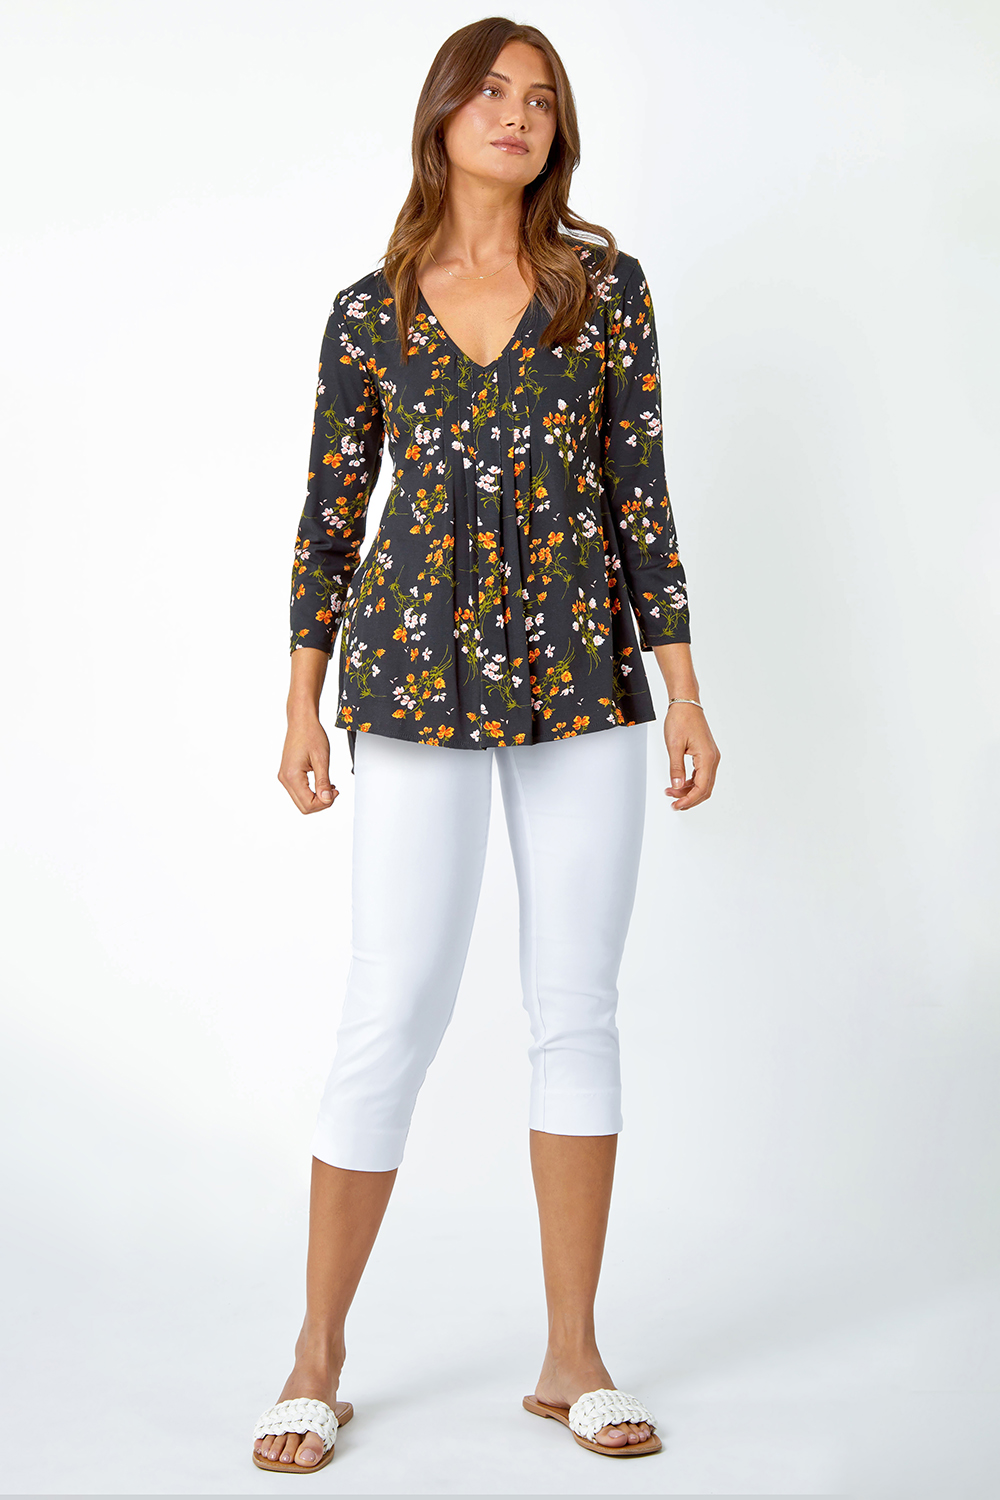 Black Floral Print Swing Stretch Top, Image 2 of 5